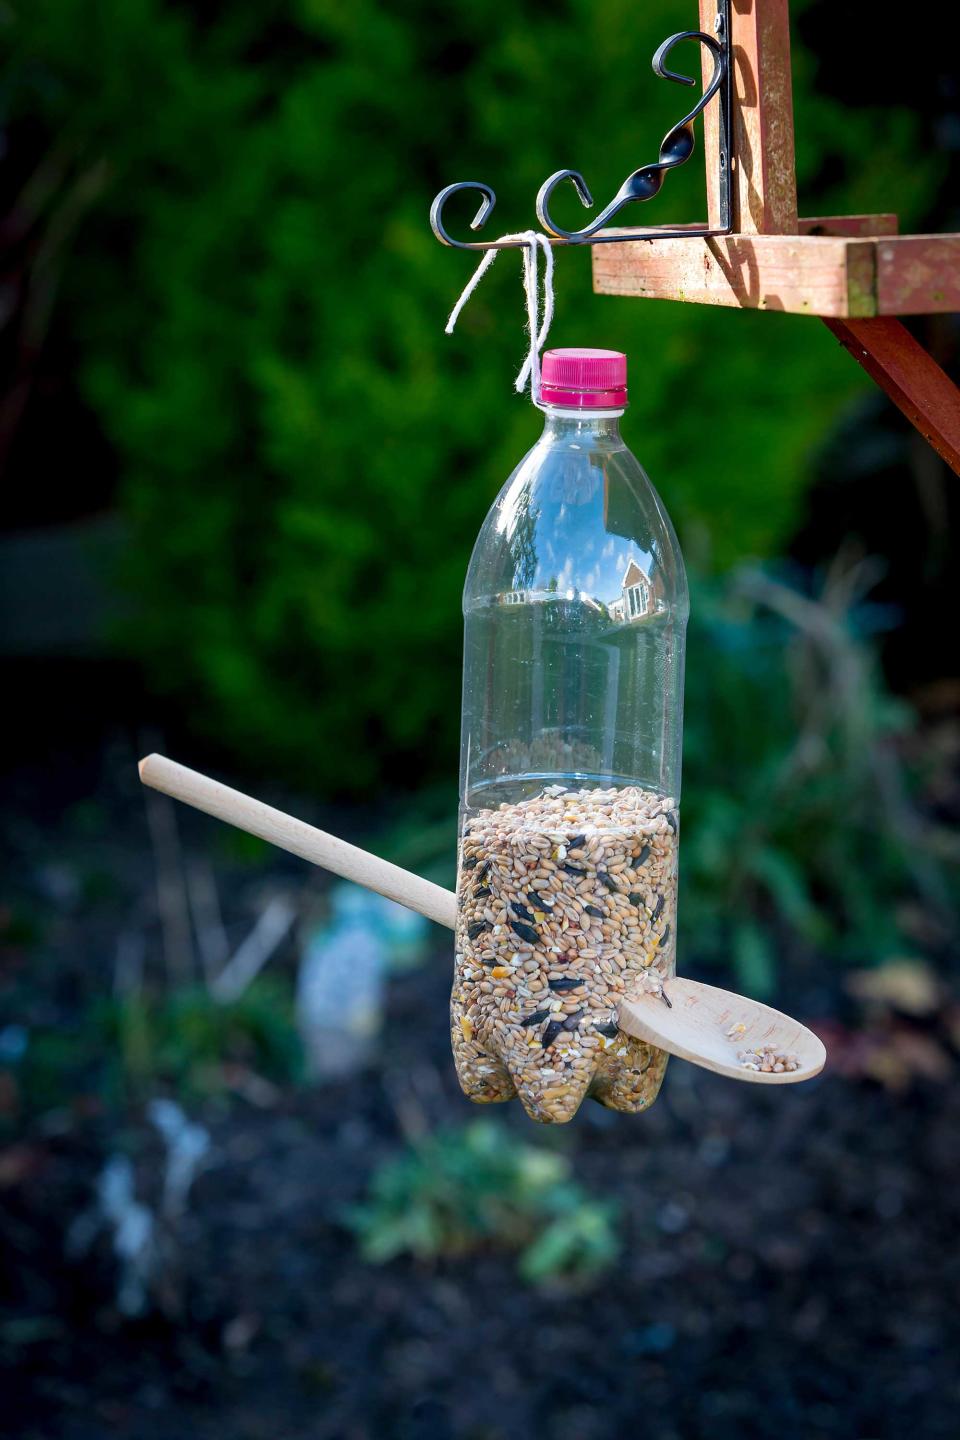 <p> Attracting local feathered friends into your garden will instantly give your space more life and color. Plus, watching them flit around is a real mood-booster, and is fun for kids, too.&#xA0; </p> <p> For your budget backyard ideas, try making your own bird feeders. All you need to do is cut holes in a plastic bottle and insert a wooden spoon. Attach a piece of jute to hang it from a branch or hook, then fill with a mix of bird seed. </p>